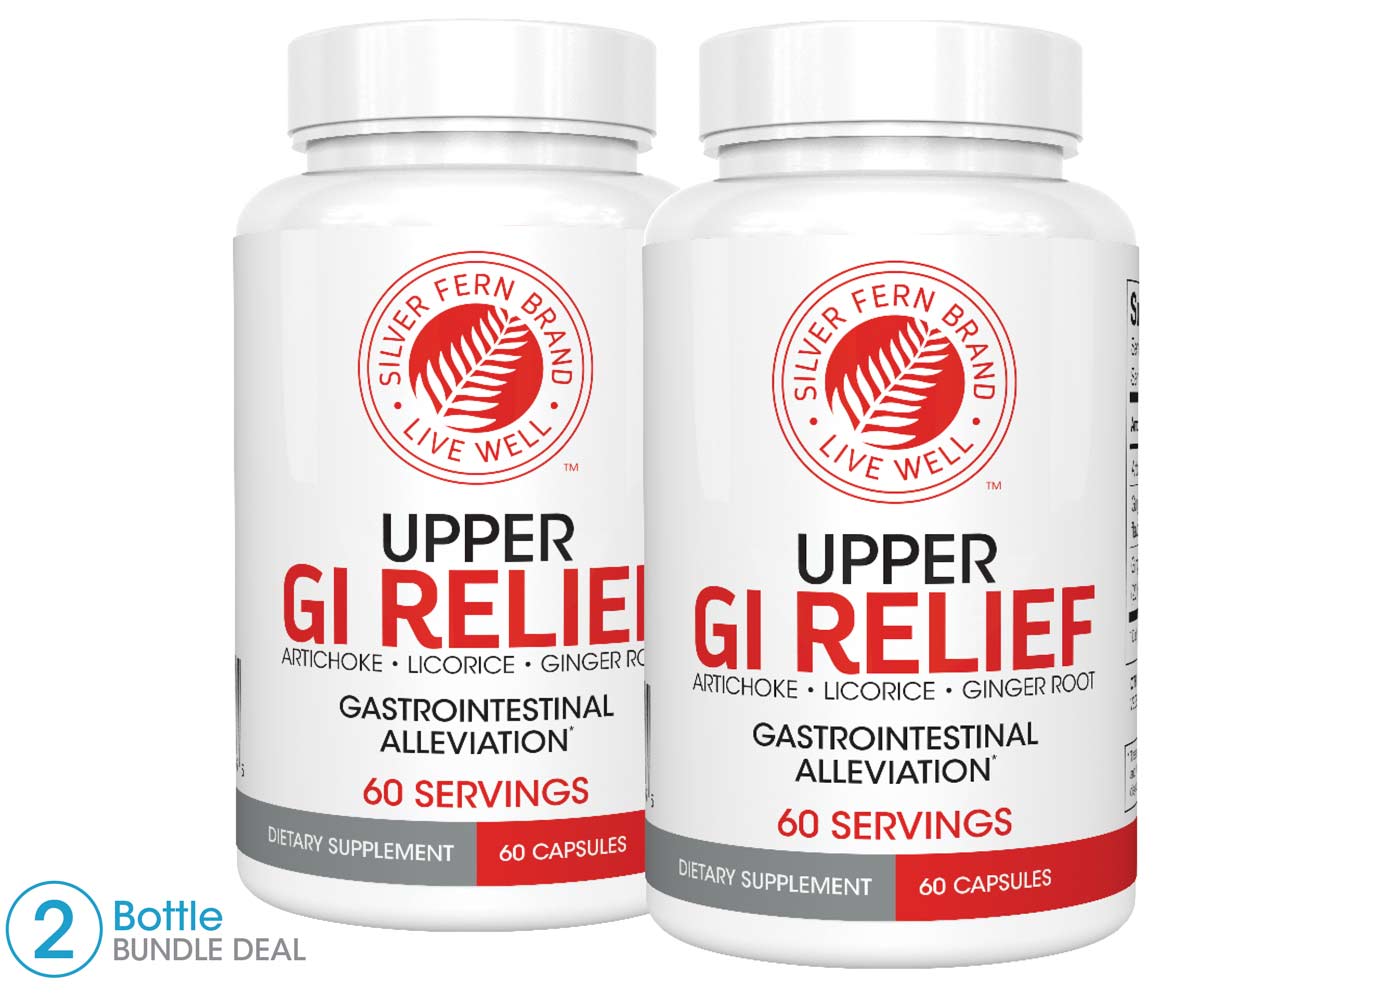 GI Relief - Acid Reflux, Indigestion, Gas and Bloating Relief